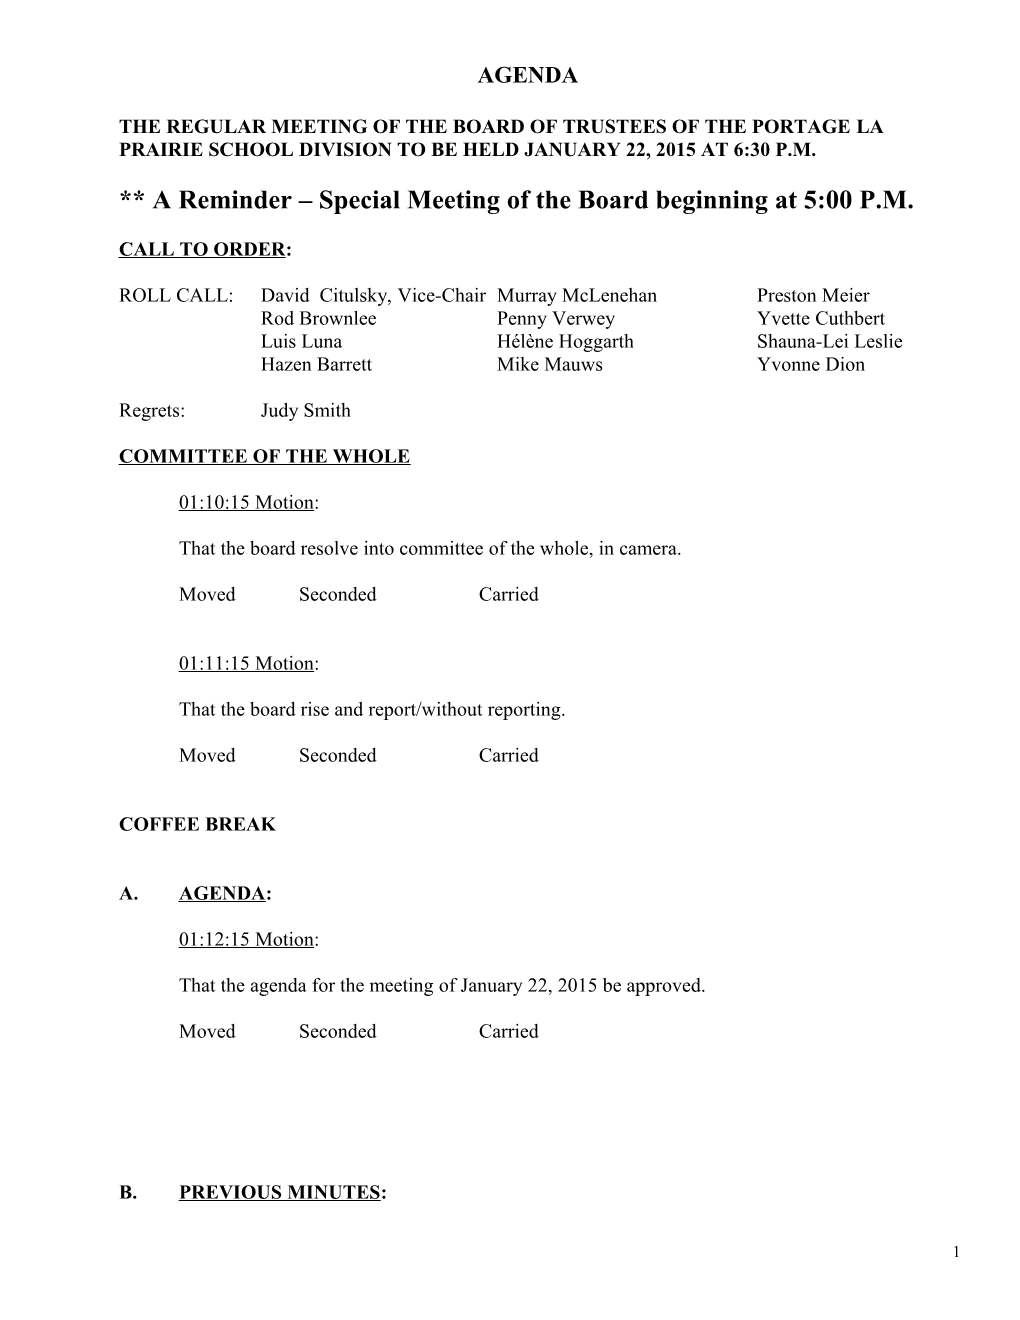 A Reminder Special Meeting of the Board Beginning at 5:00 P.M